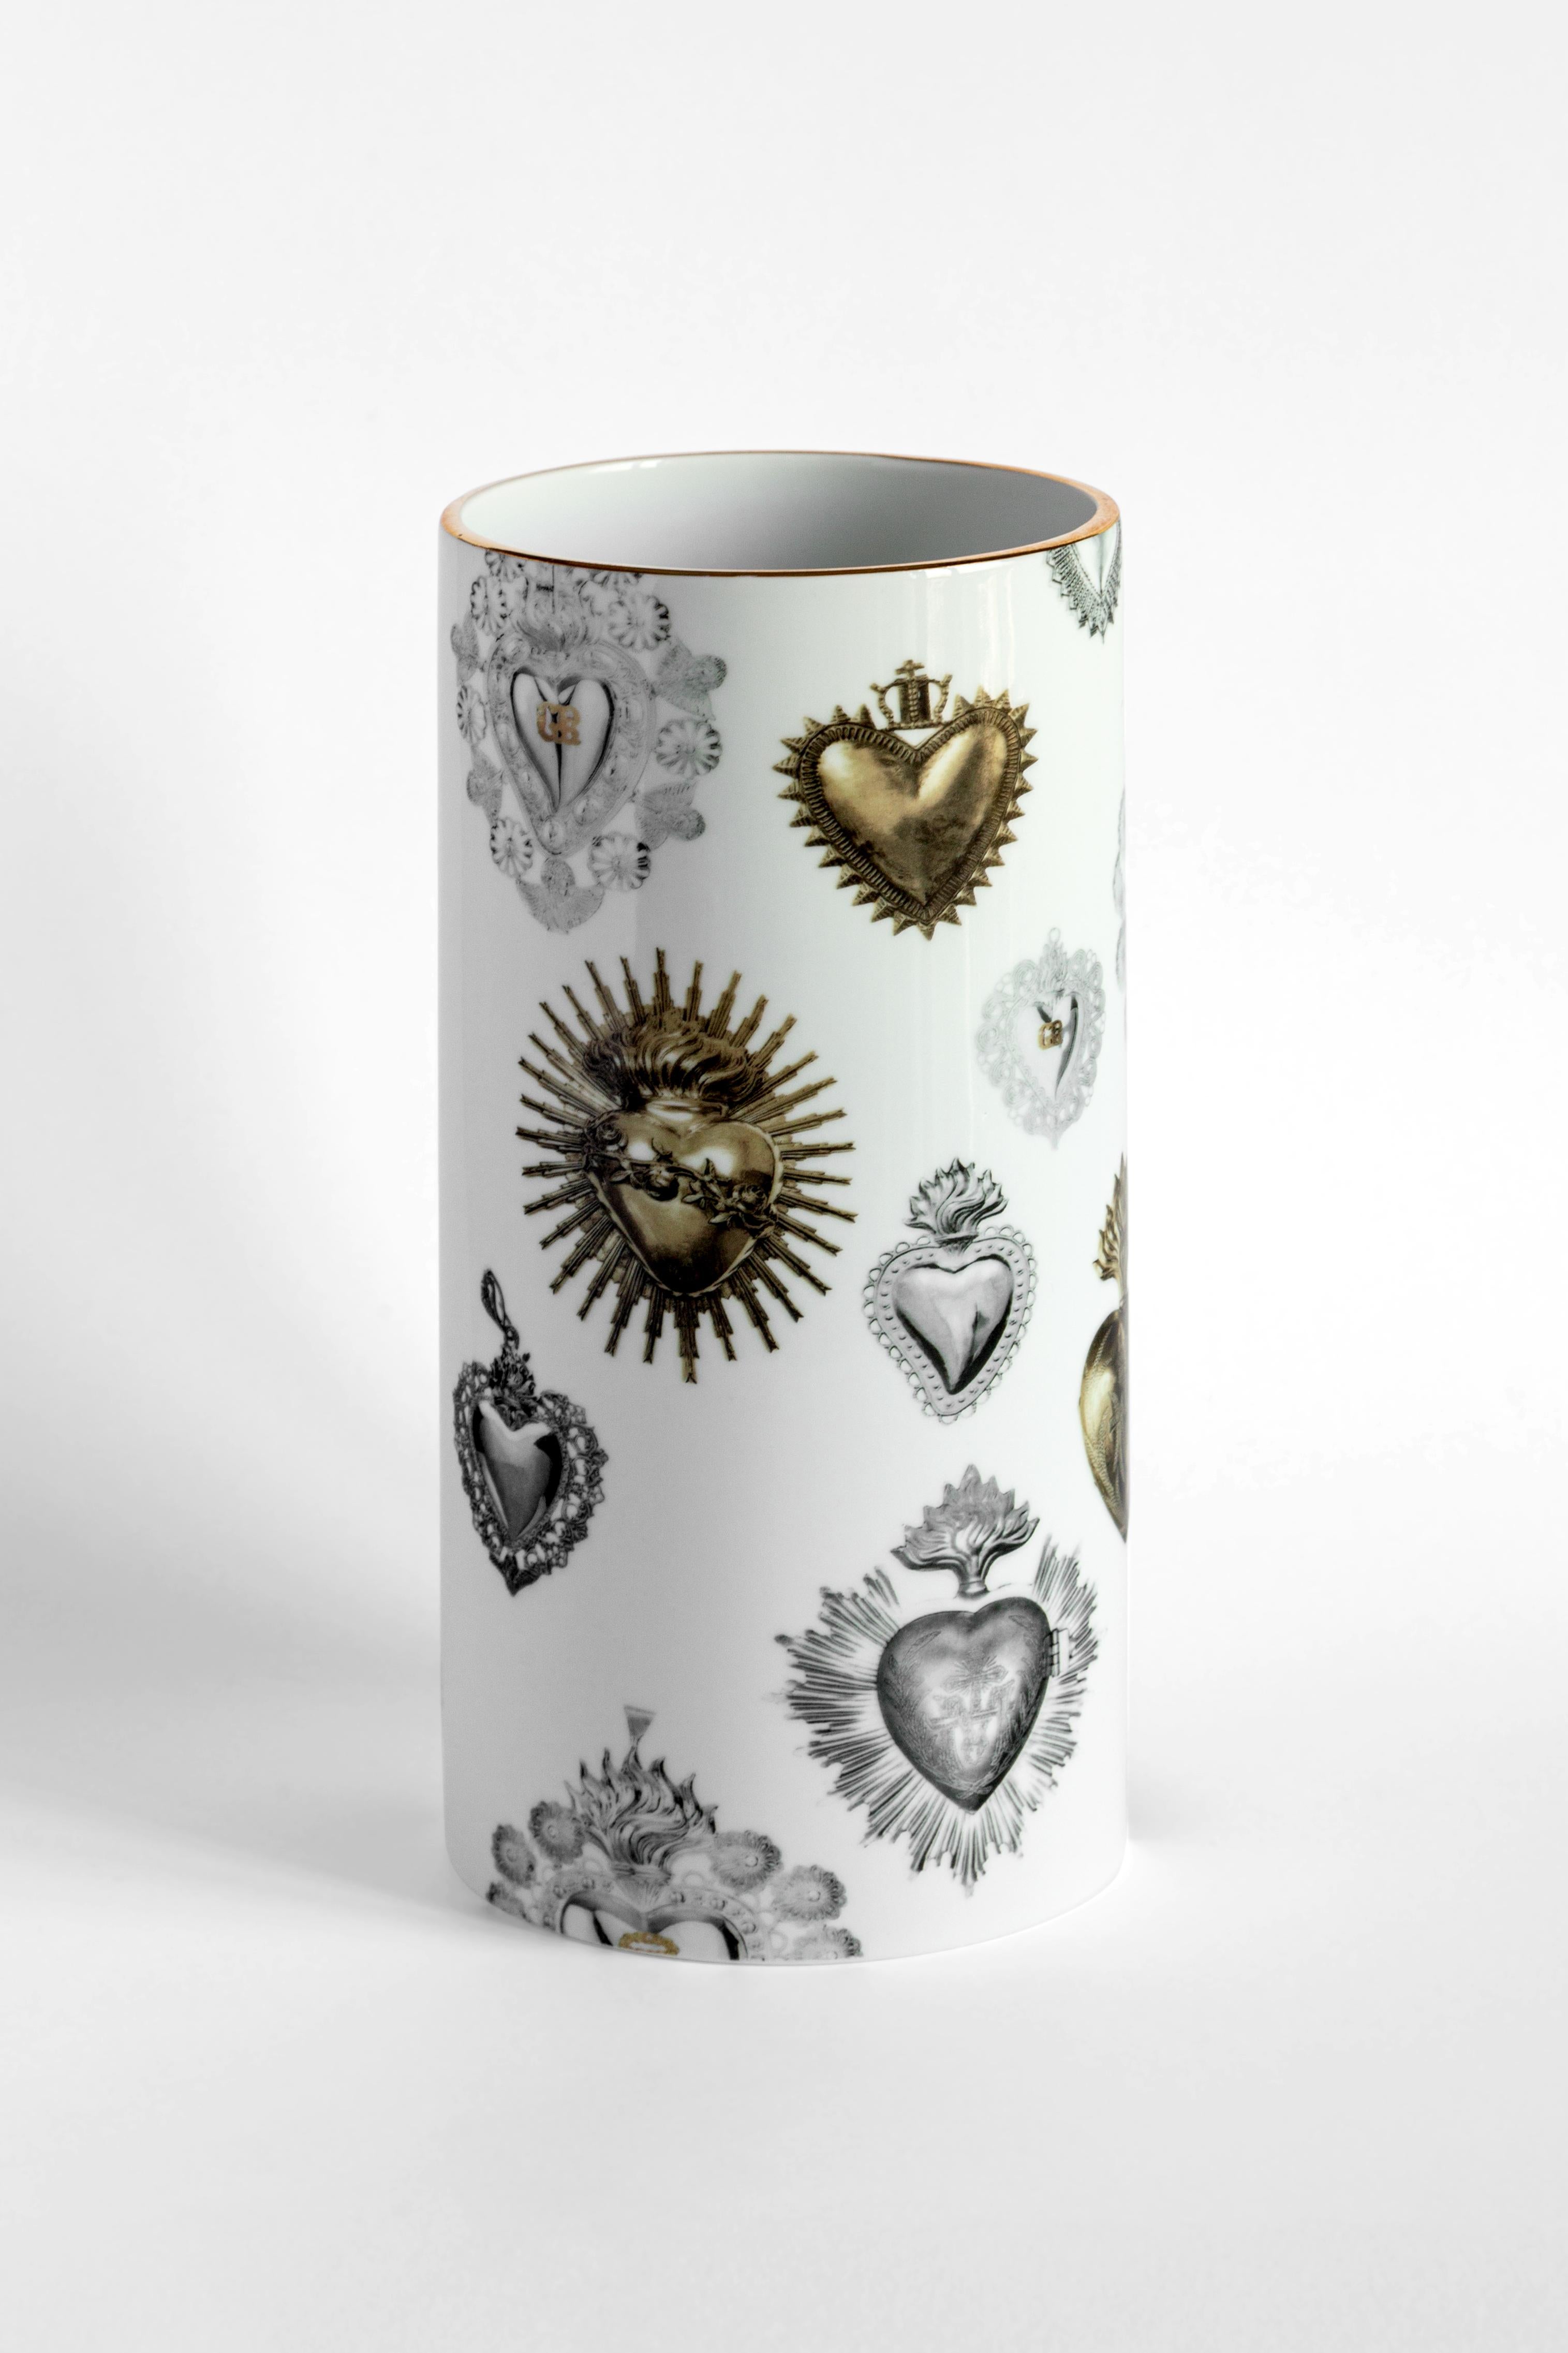 The cylindrical design of this porcelain vase is elevated and made unique by the application of a contemporary and unique decoration. This design is inspired by heart shaped ex votos, very popular in Italy and in the Mediterranean area. Votive